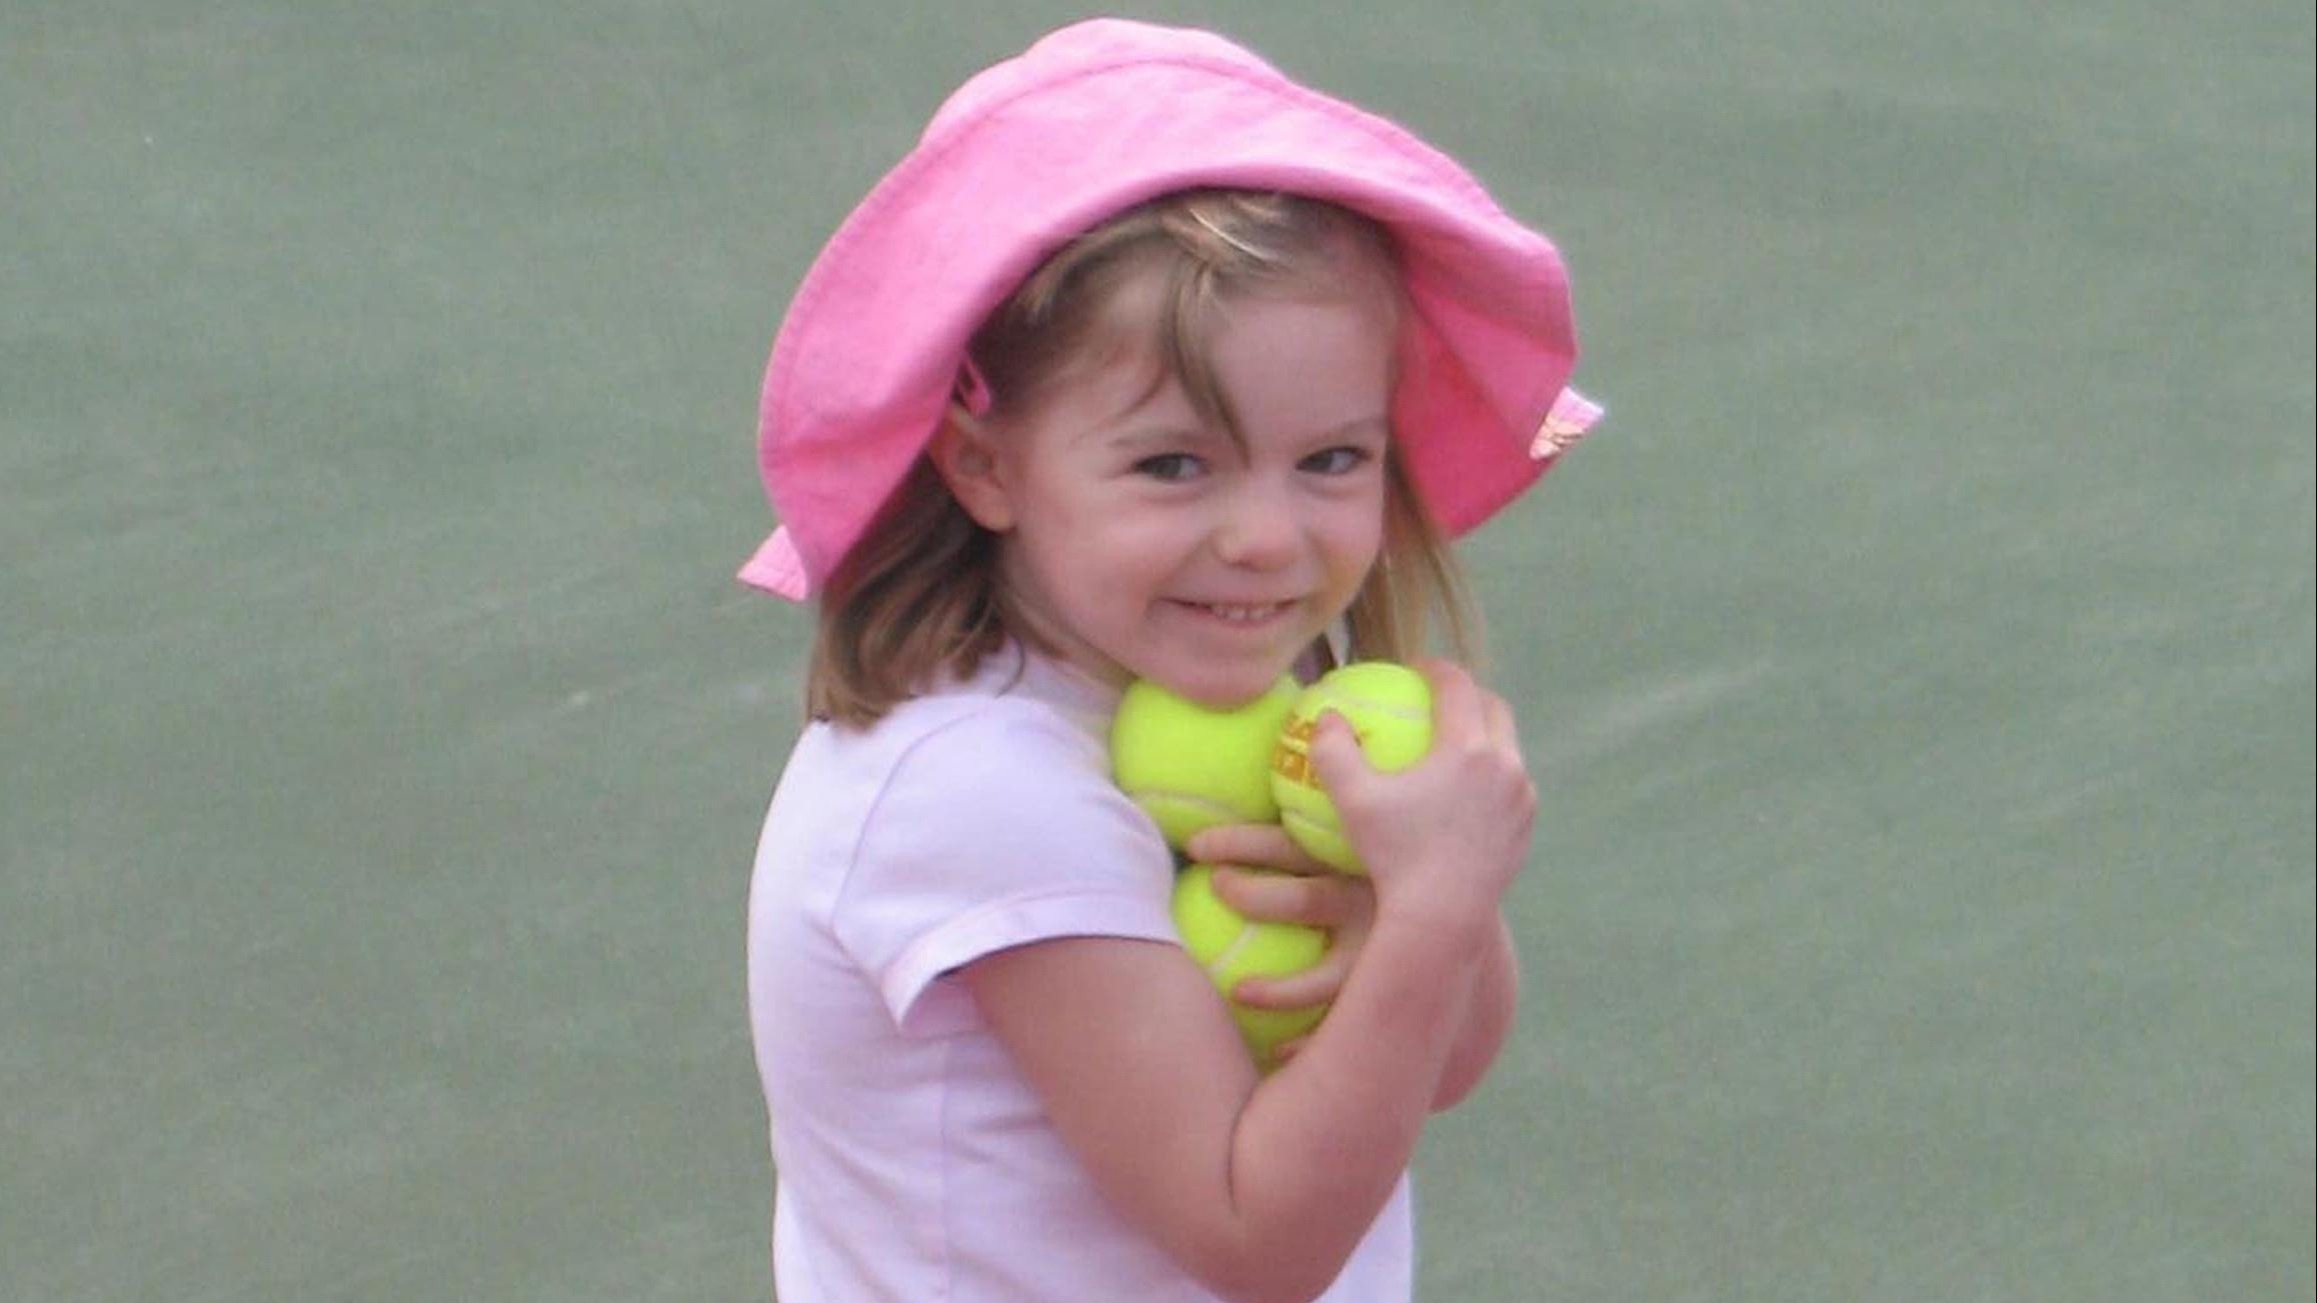 What happened to Madeleine McCann? A timeline of events since her disappearance ITV News picture